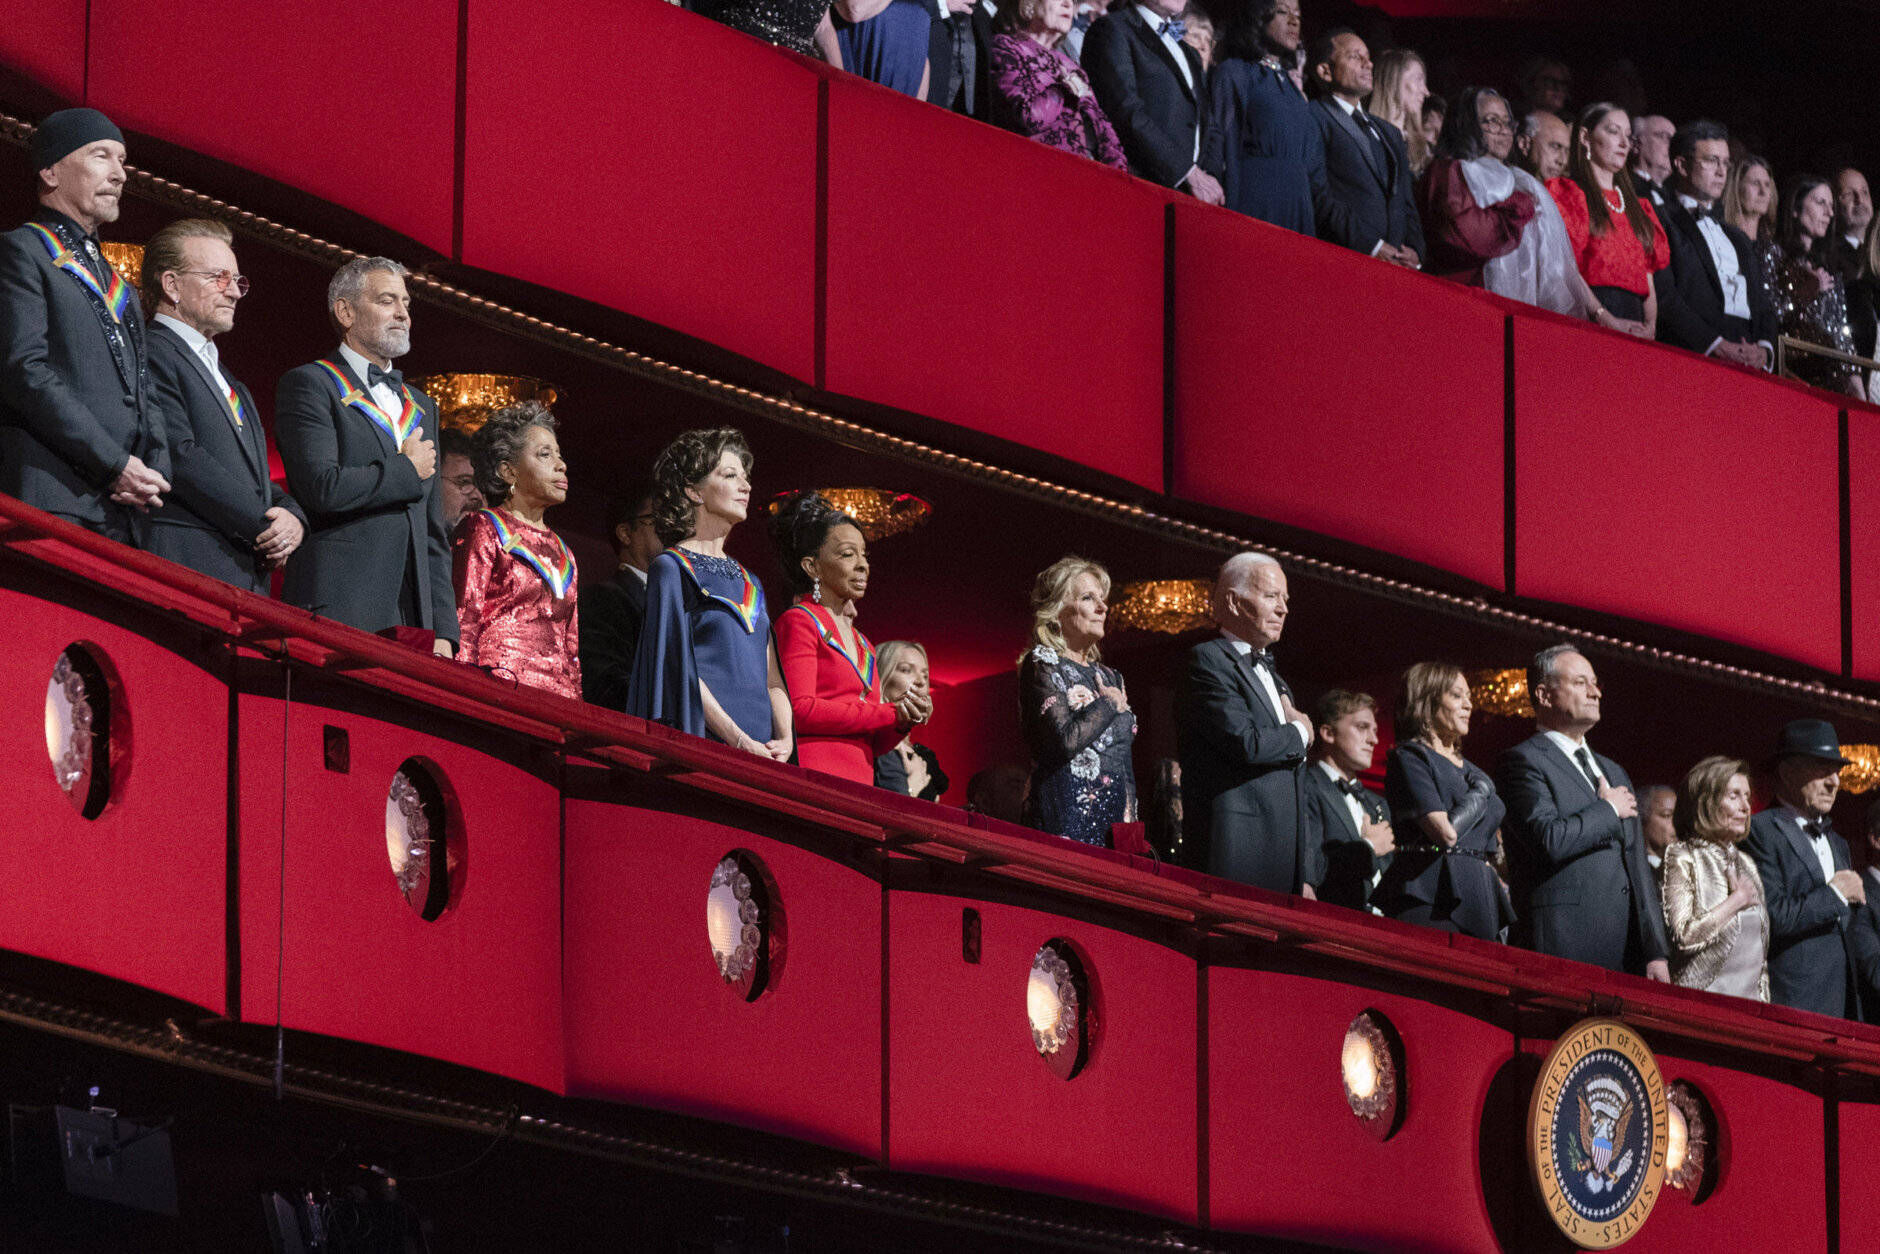 2022 Kennedy Center Honors Clooney, Gladys Knight and U2 among